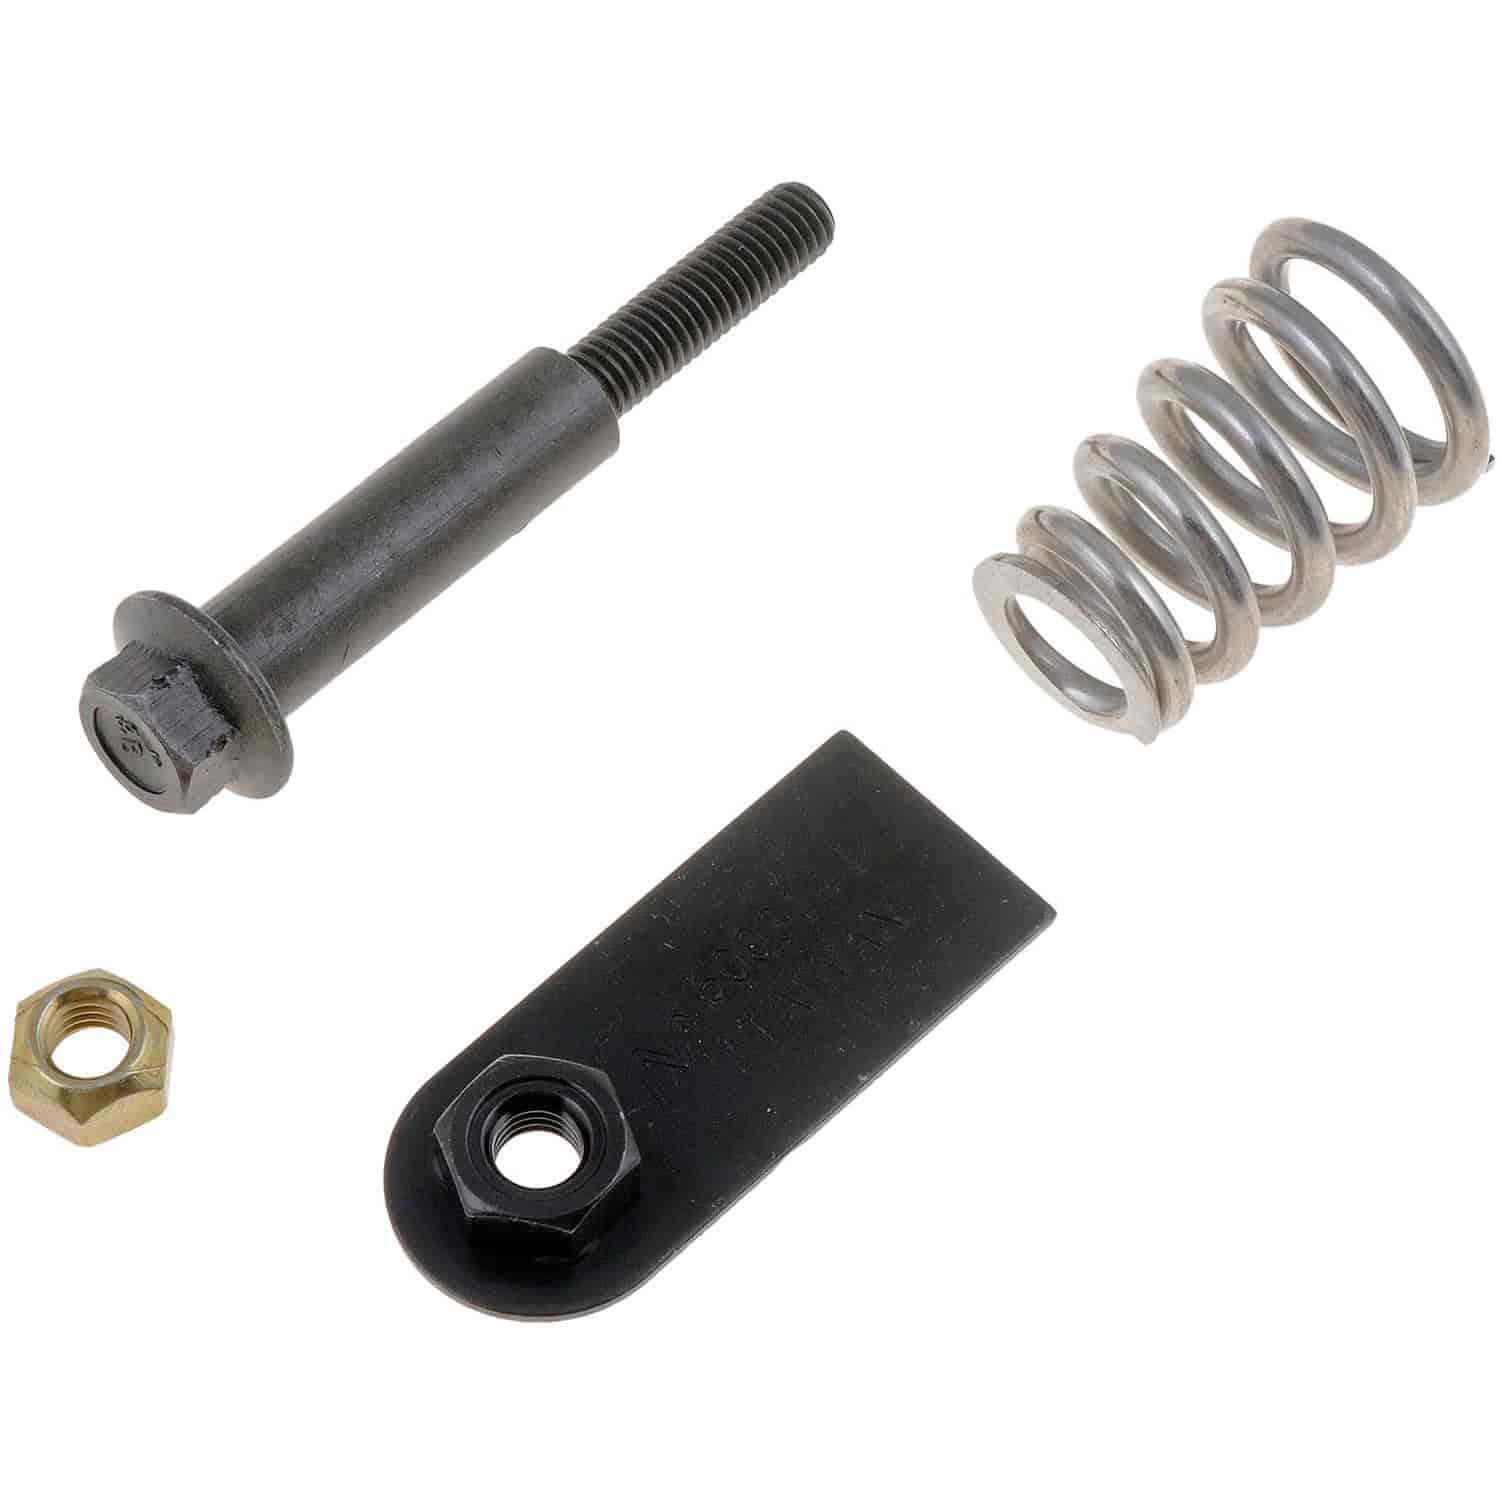 Manifold Bolt and Spring Kit - M8-1.25 x 76mm